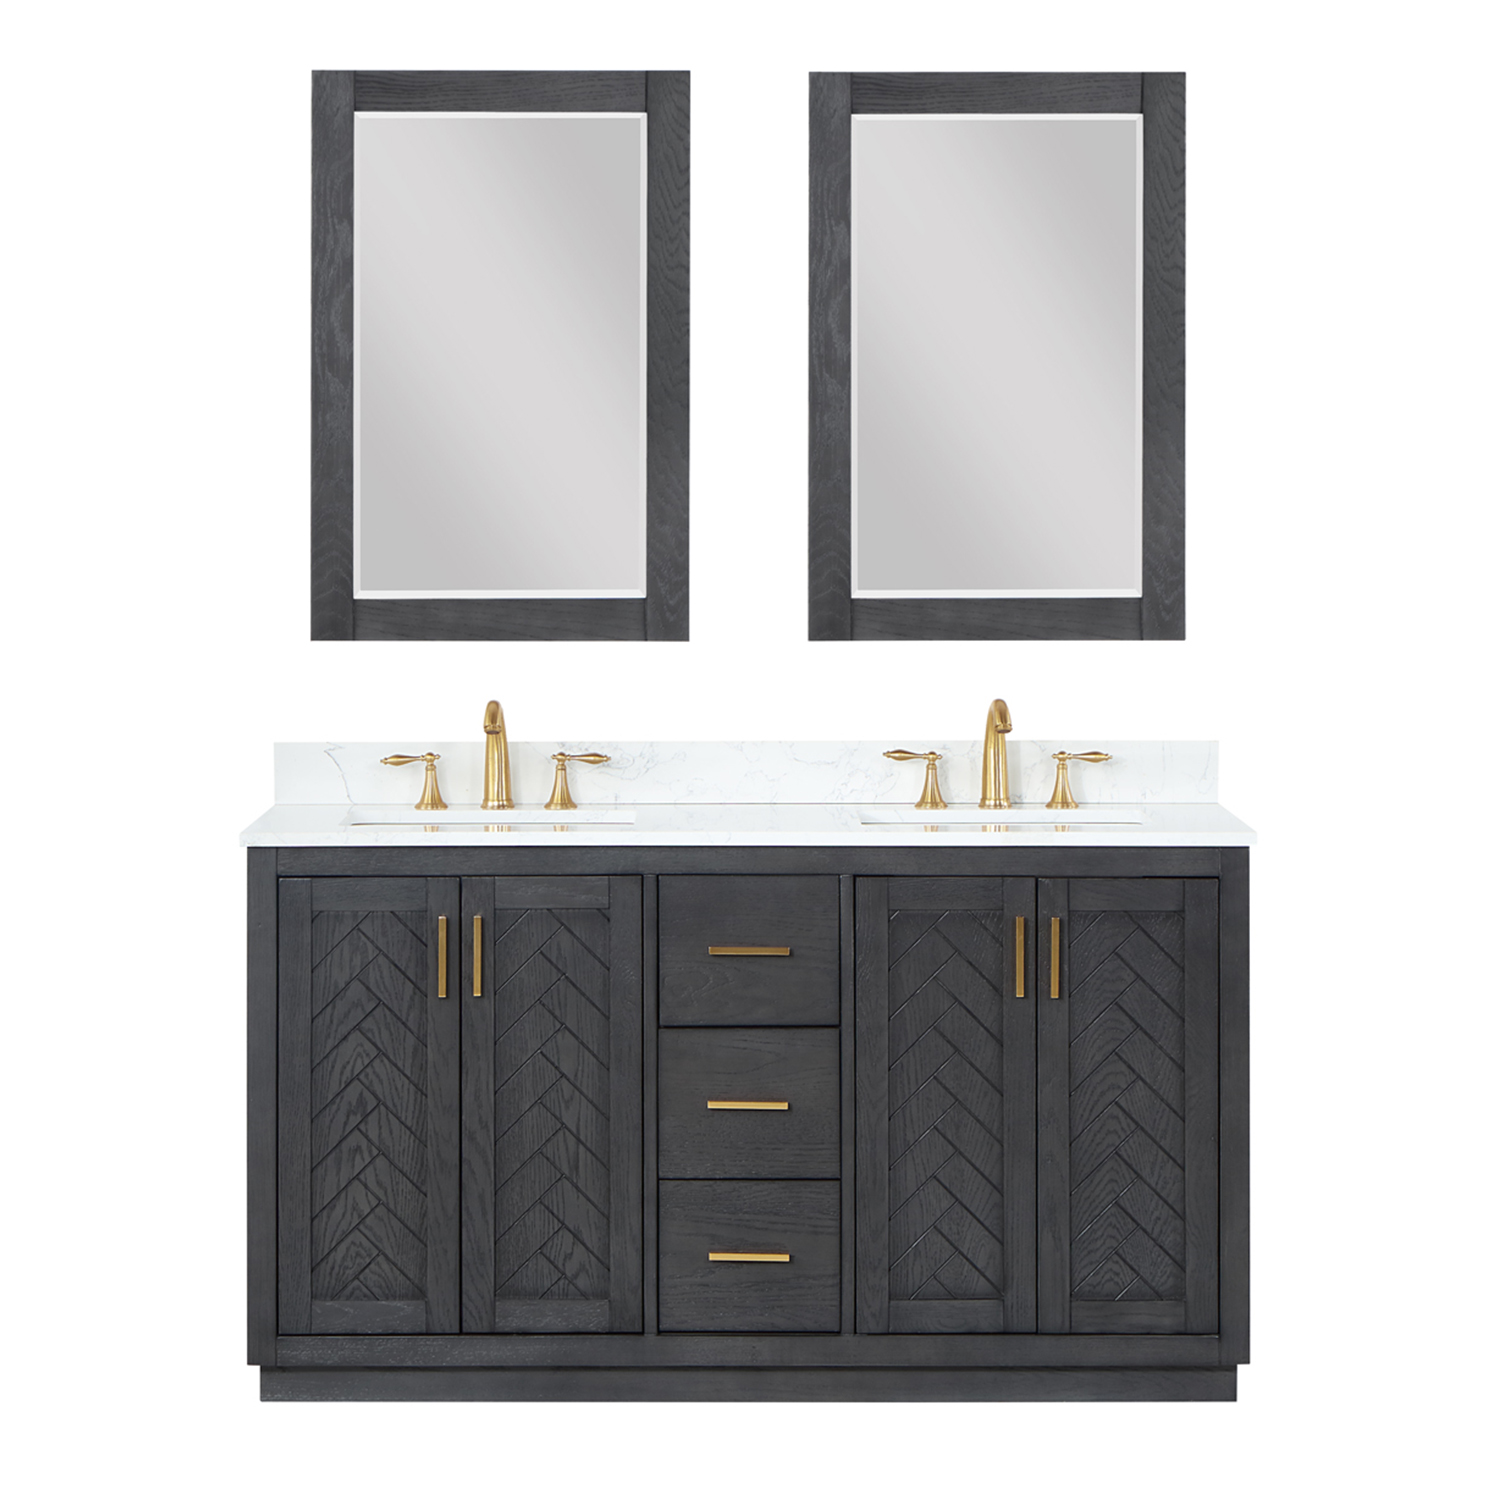 Issac Edwards Collection 60" Double Bathroom Vanity Set in Brown Oak with Grain White Composite Stone Countertop without Mirror 